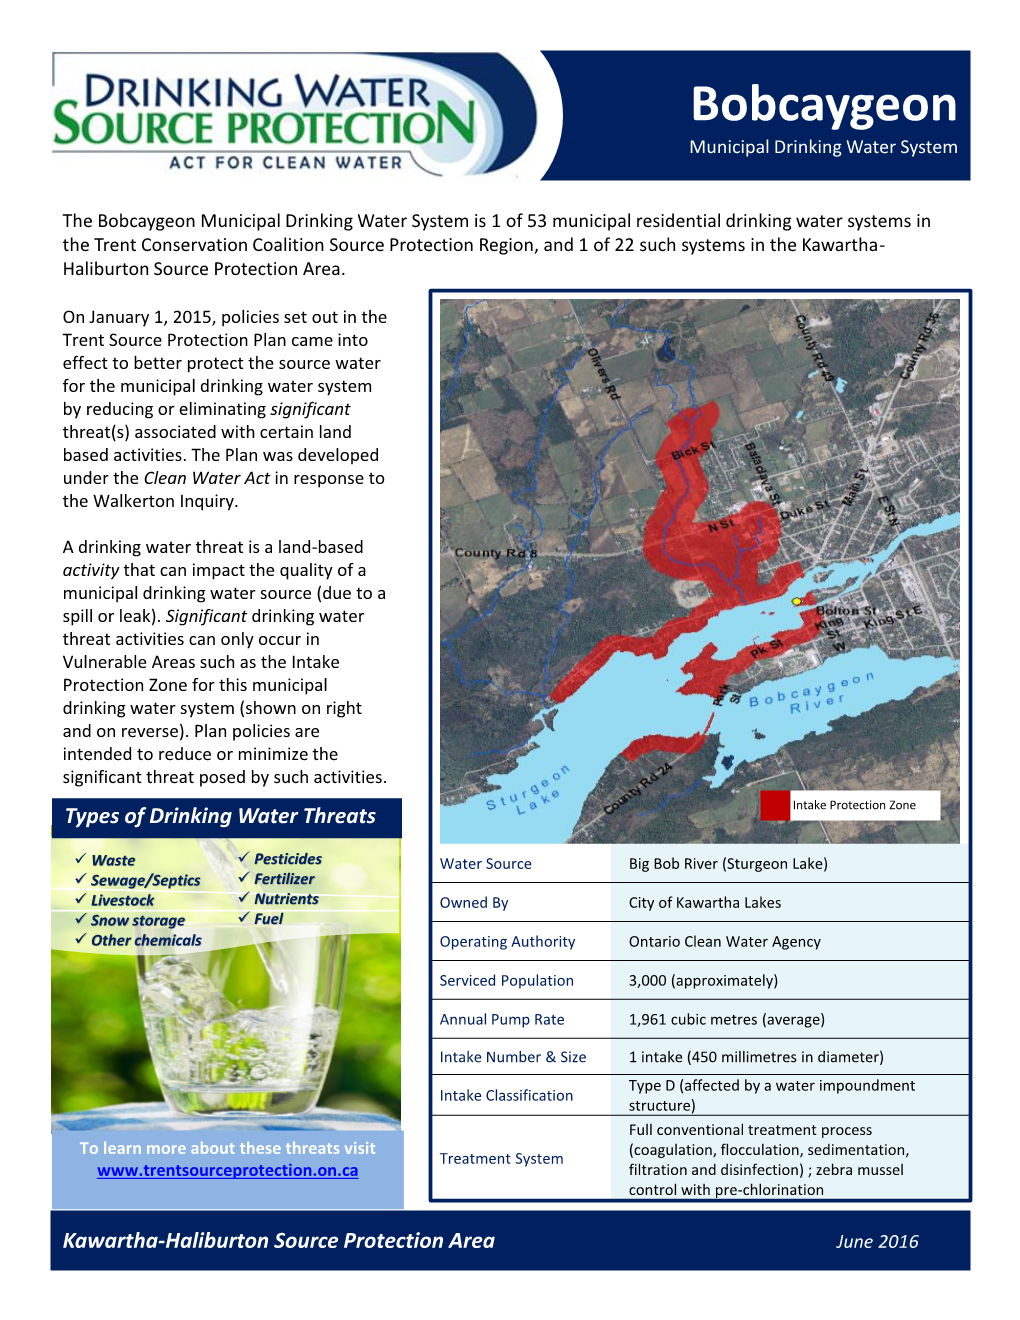 Bobcaygeon Municipal Drinking Water System